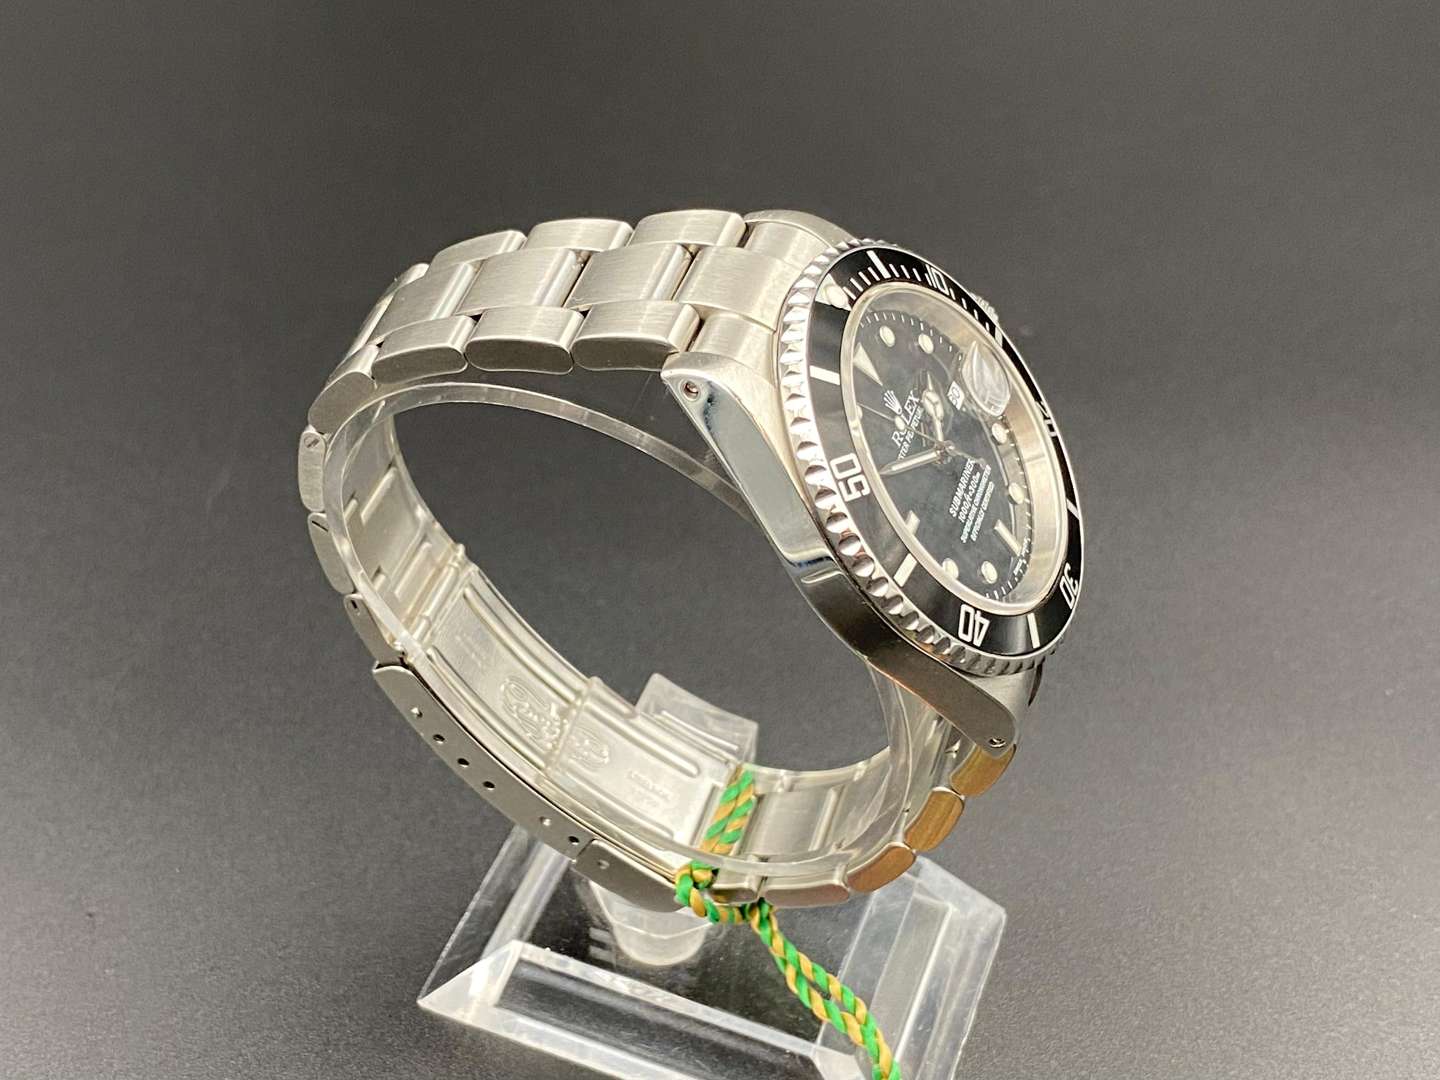 <p>ROLEX, “Submariner”, stainless steel, automatic, centre seconds, calendar wristwatch. Ref 16610, Serial Number P575641, 2000.</p>